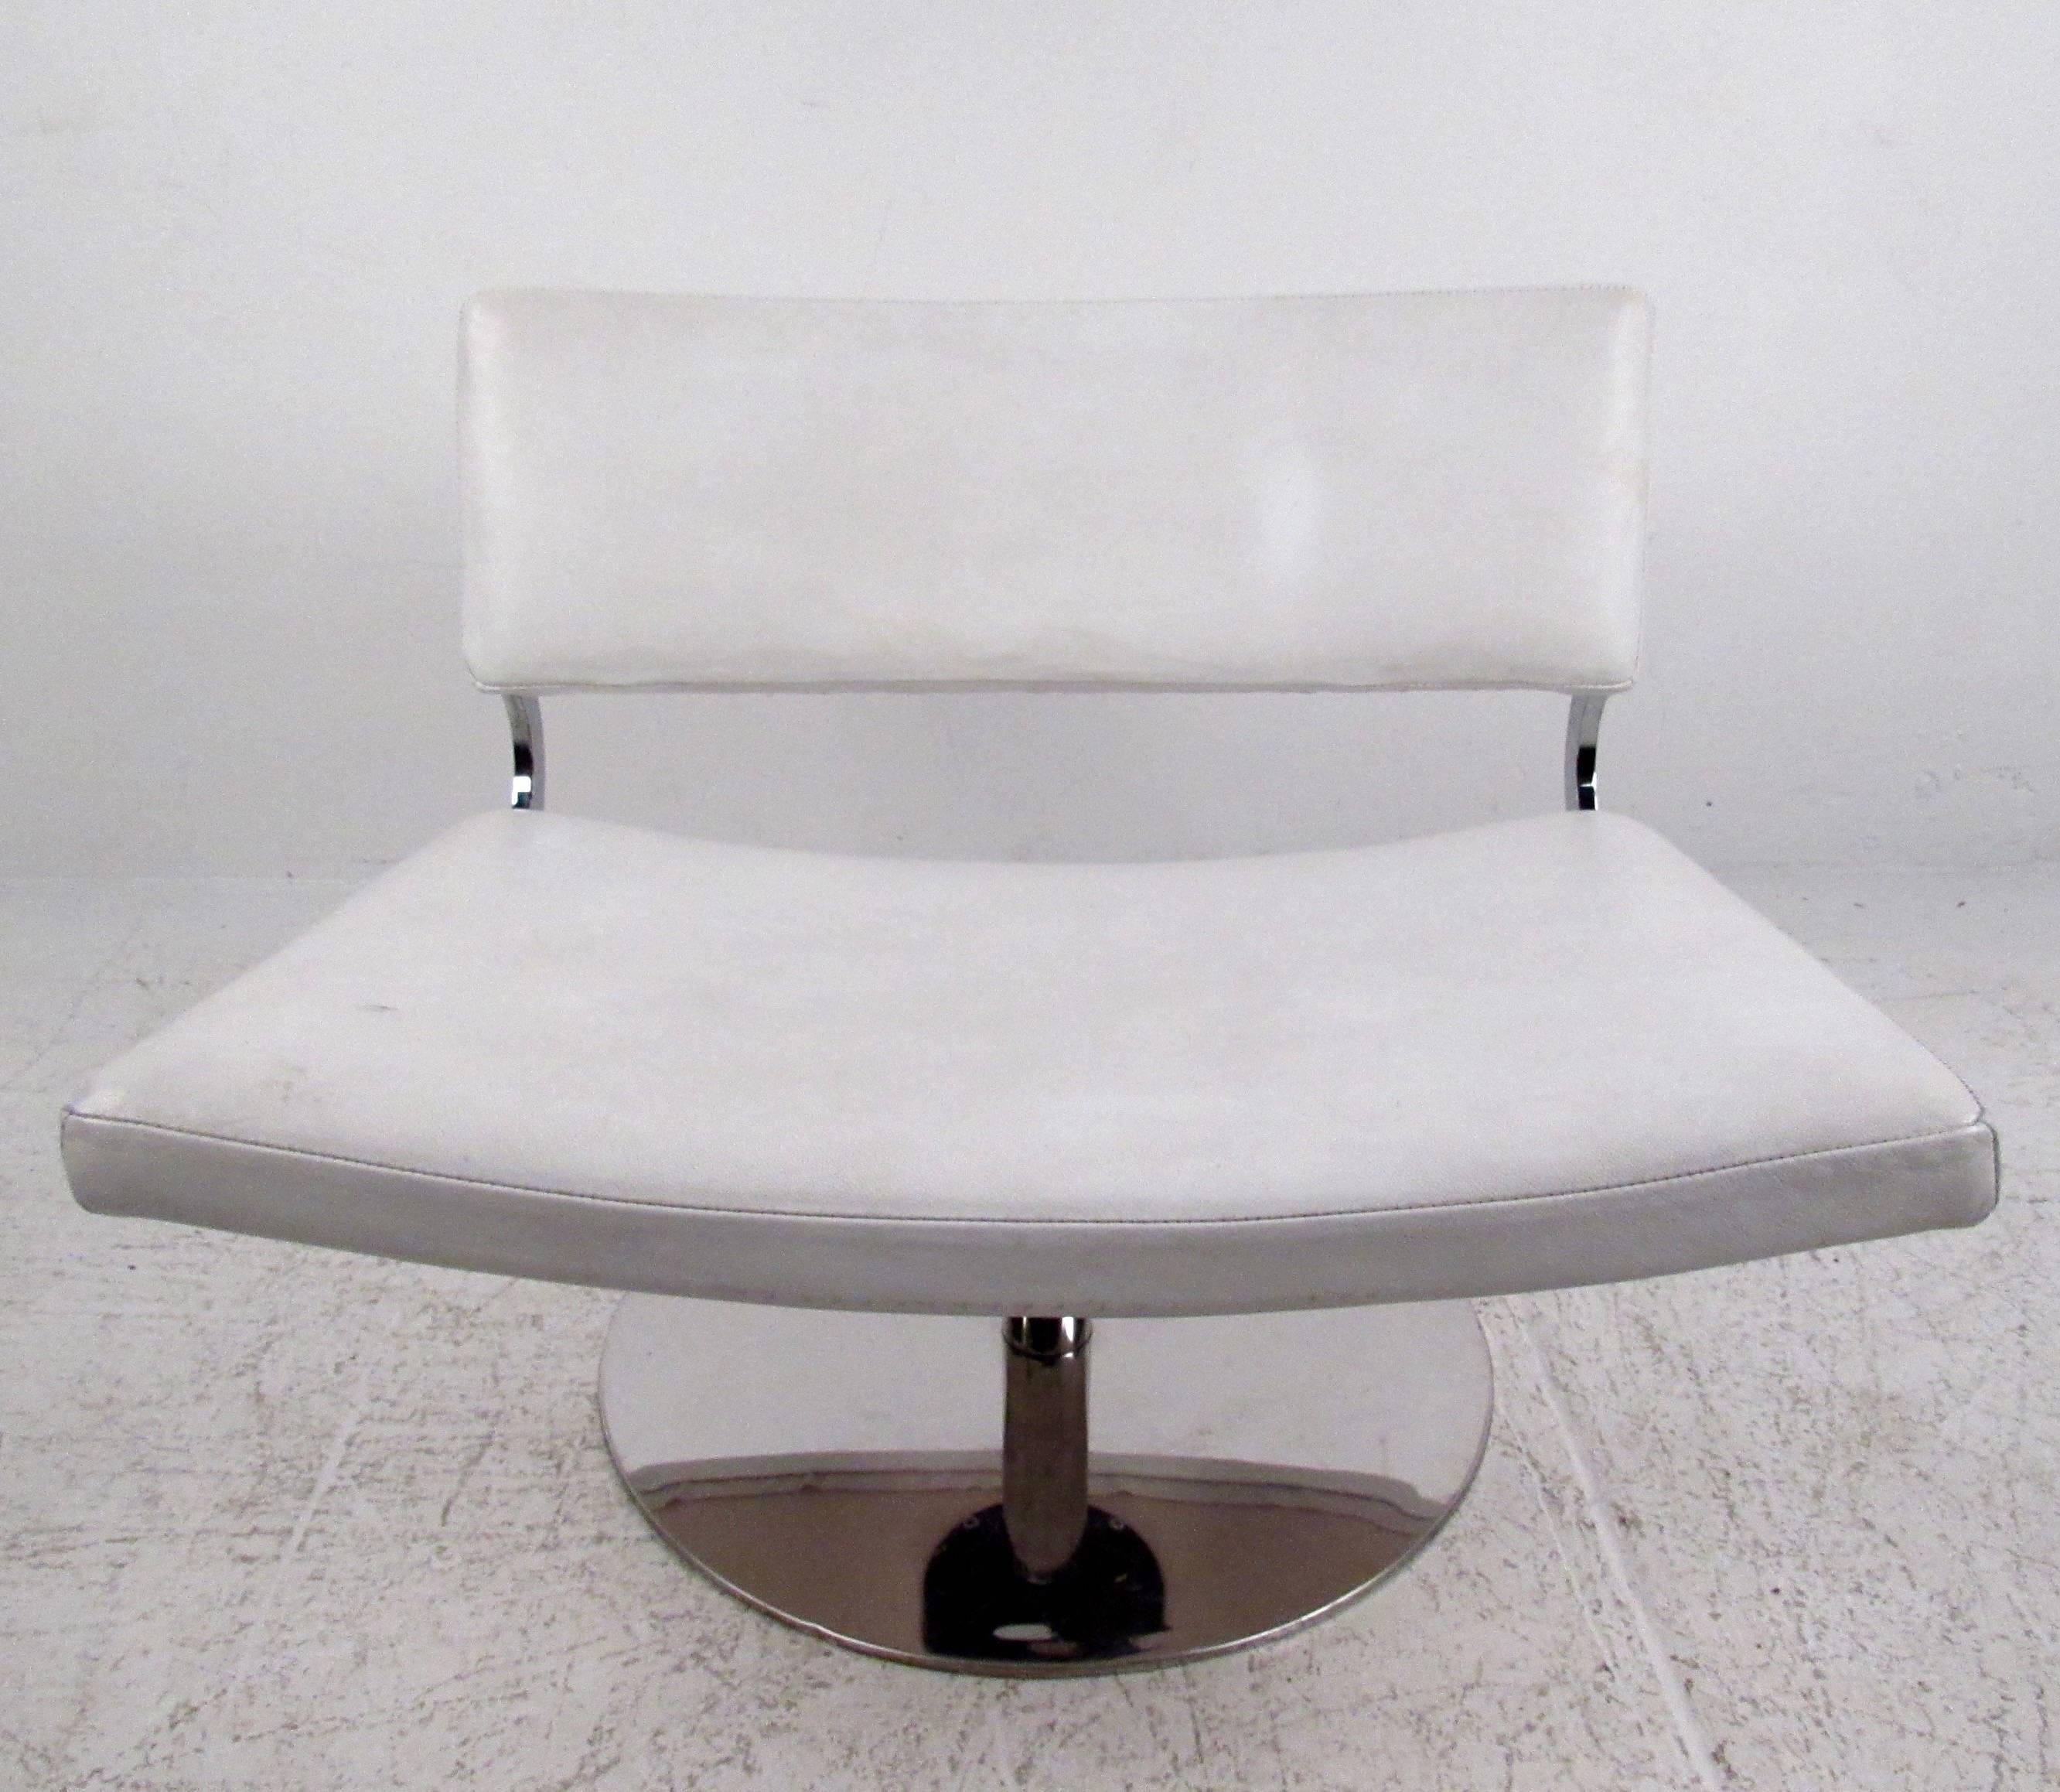 This stylish slipper chair features a chrome swivel base and uniquely wide seat. Perfect lounge chair for any modern interior, the mix of leather and chrome makes a wonderful addition to home or office. Please confirm item location (NY or NJ).